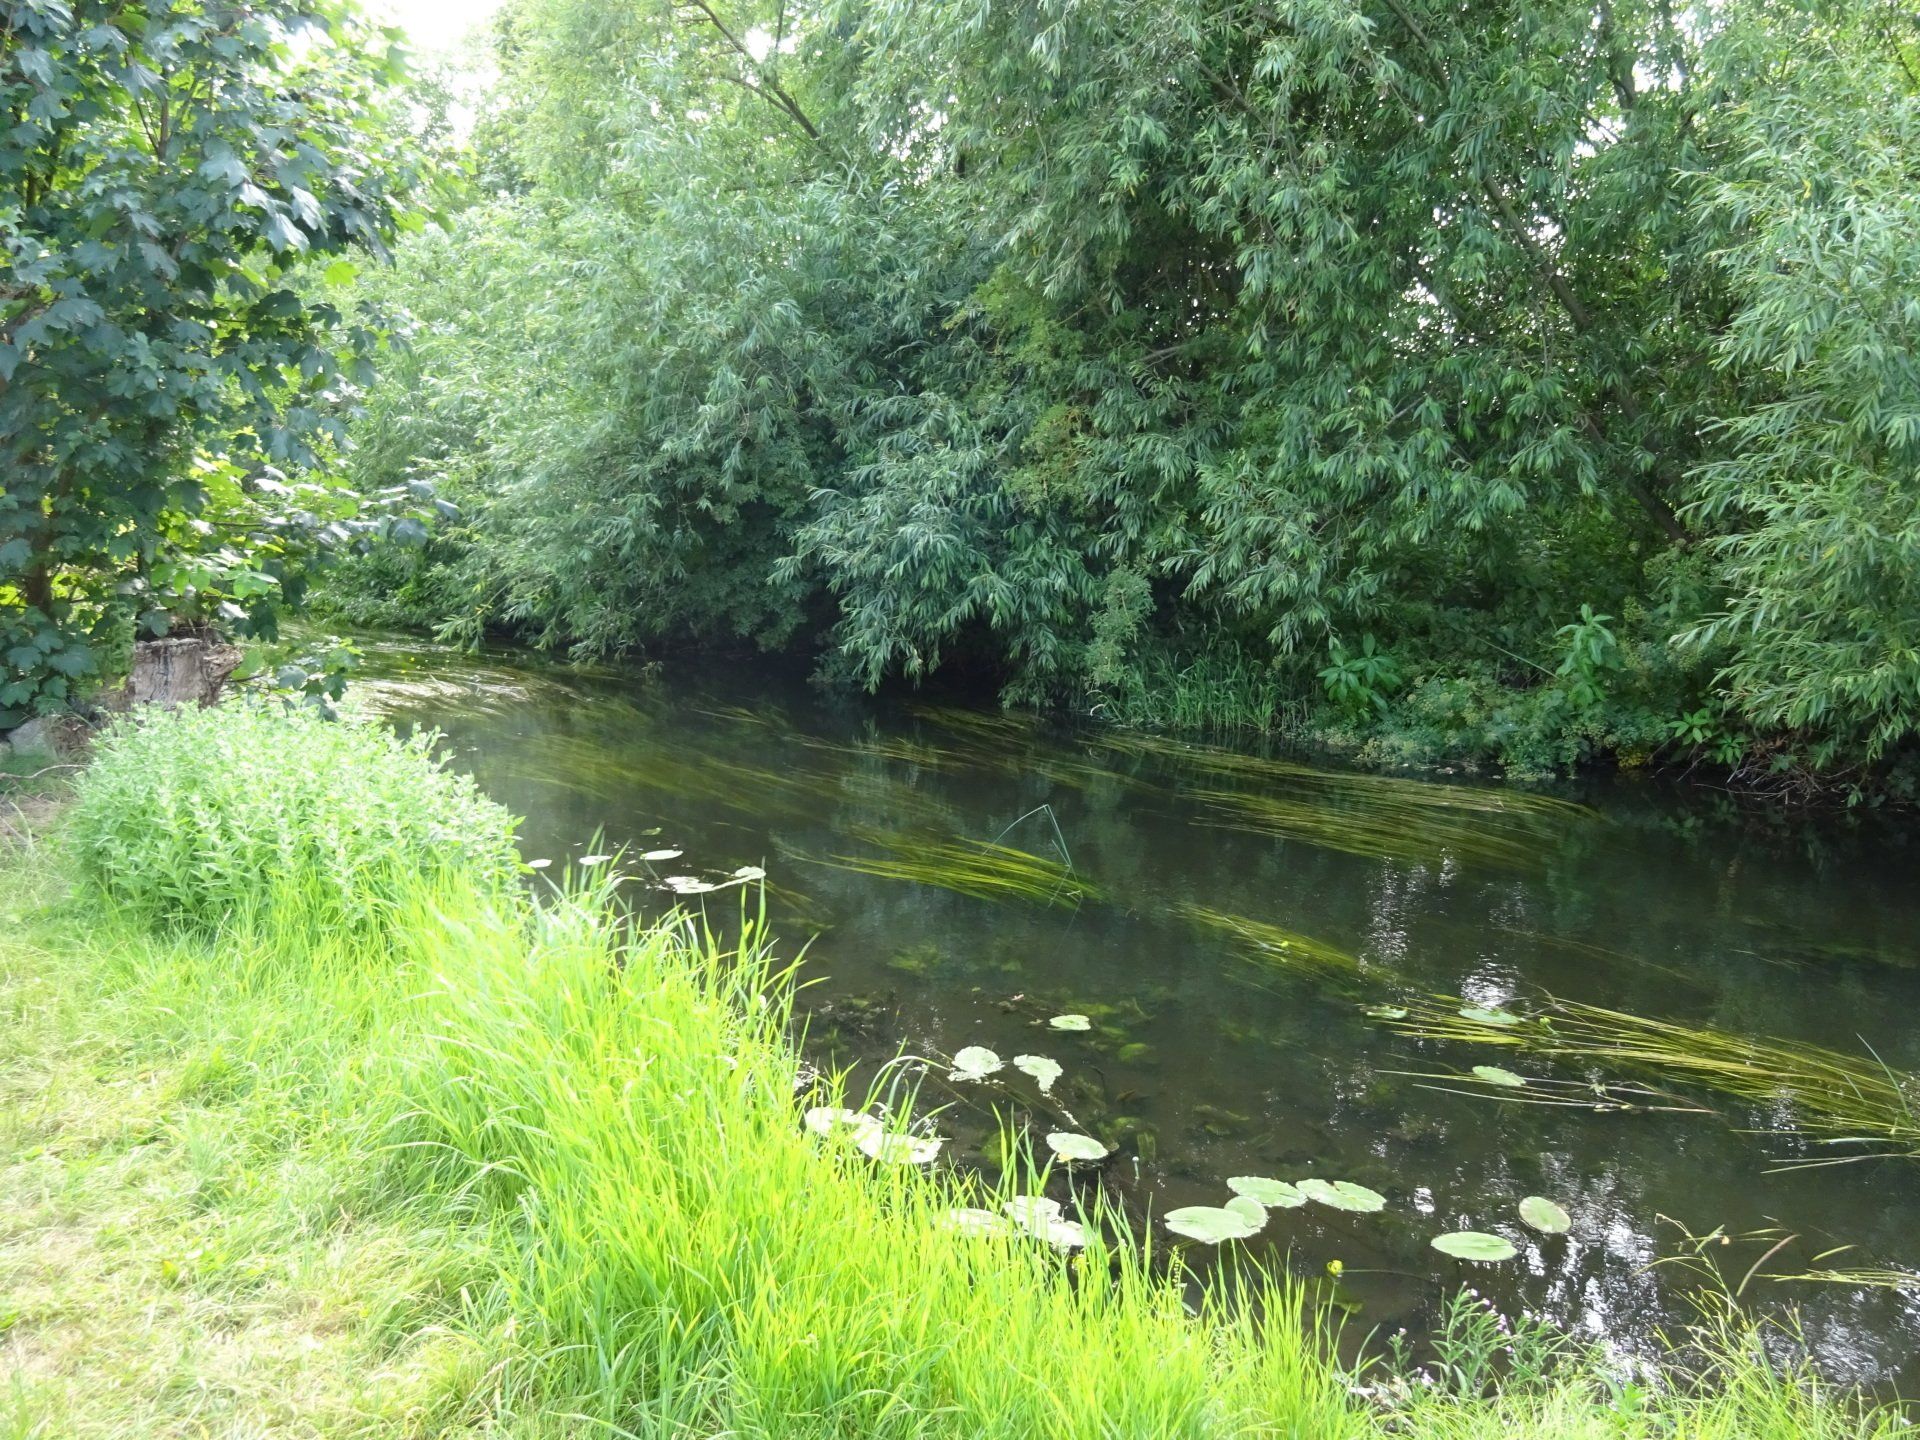 The Colne River, Longford, today